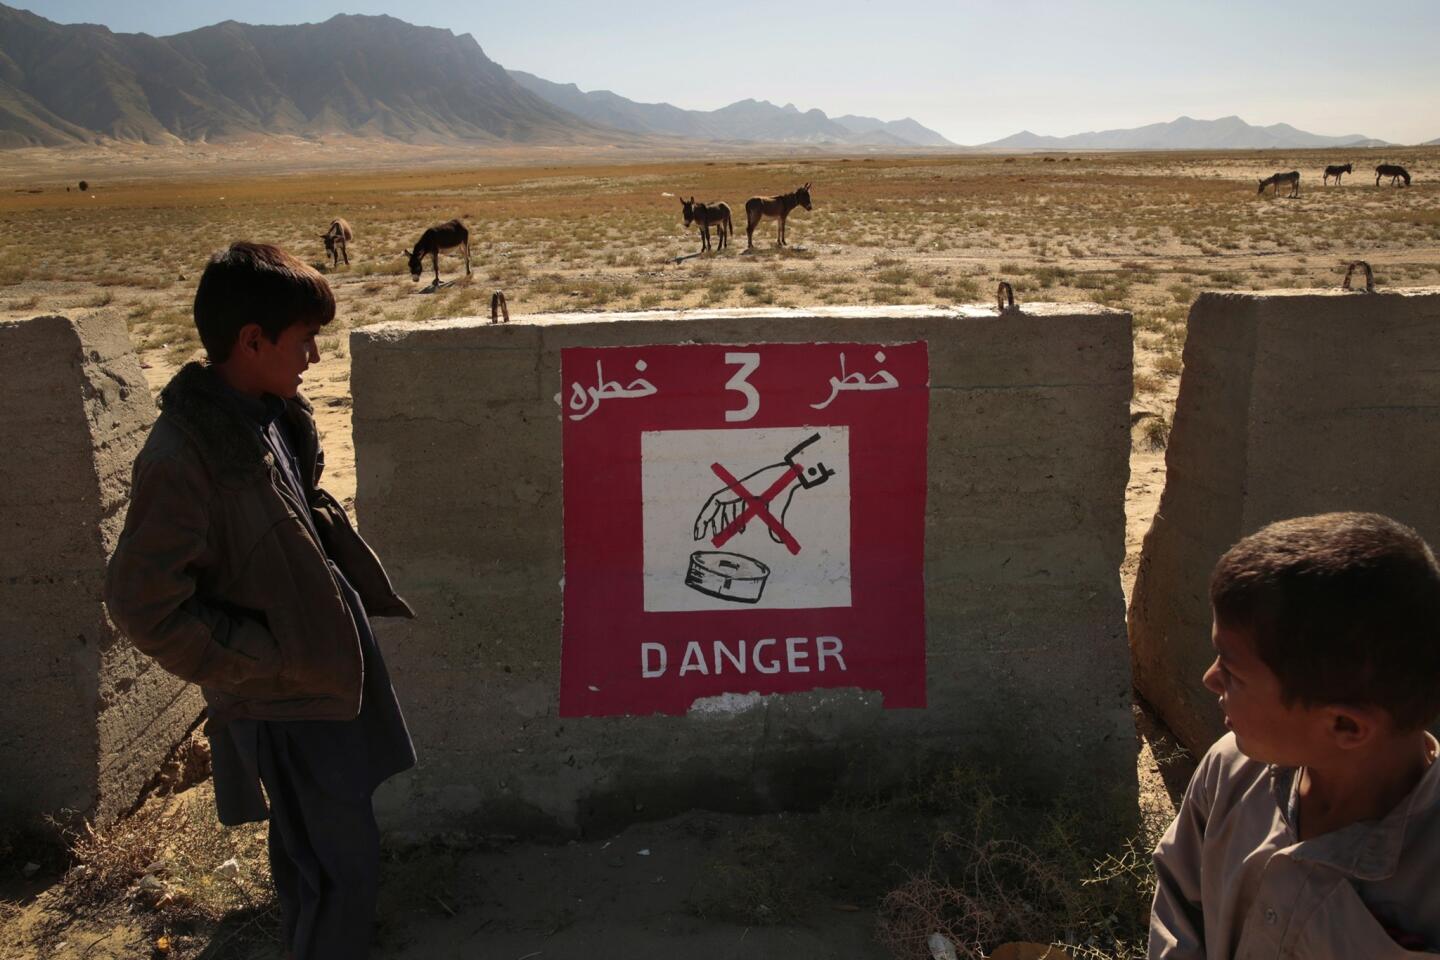 Despite signs warning against it, Afghans, including children, often tend to their animals inside the firing range near Bagram air base. Others scavenge for scrap metal, sometimes picking up unexploded ordnance.